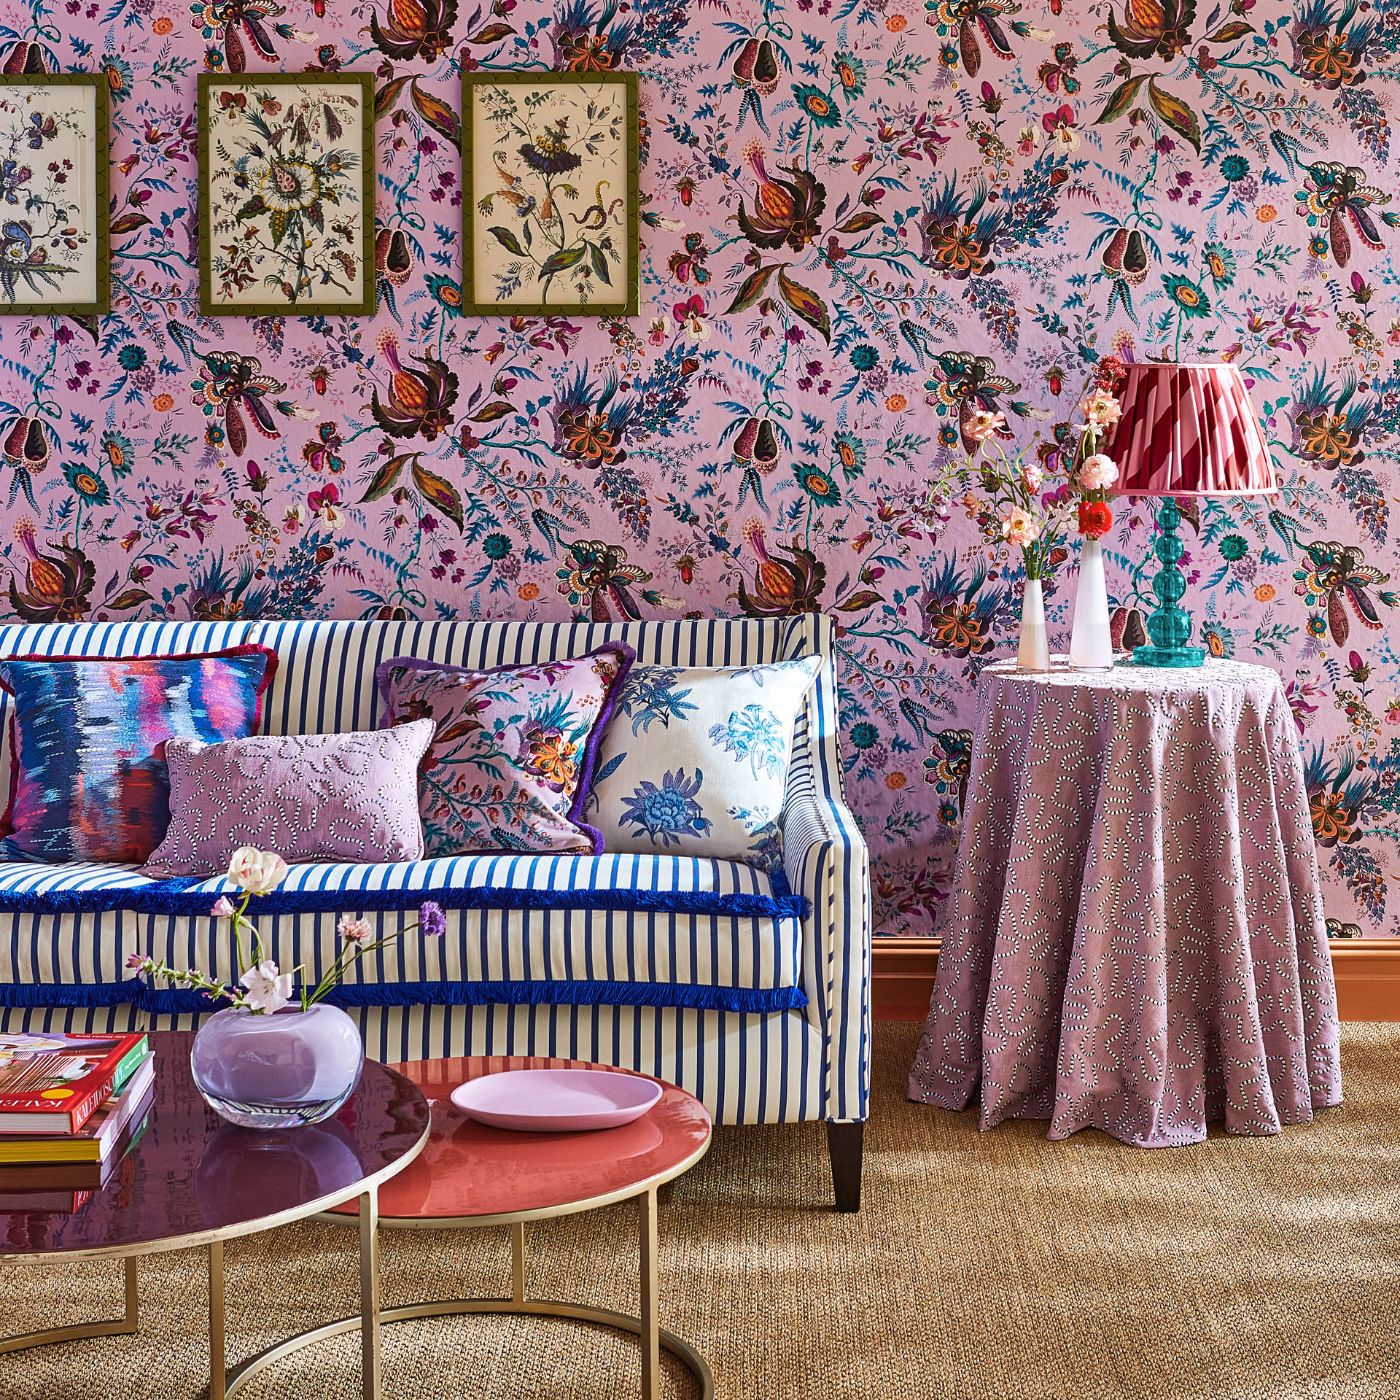 Pink maximalist style living room with floral wallpaper and a striped sofa designed by Sophie Robinson for Harlequin